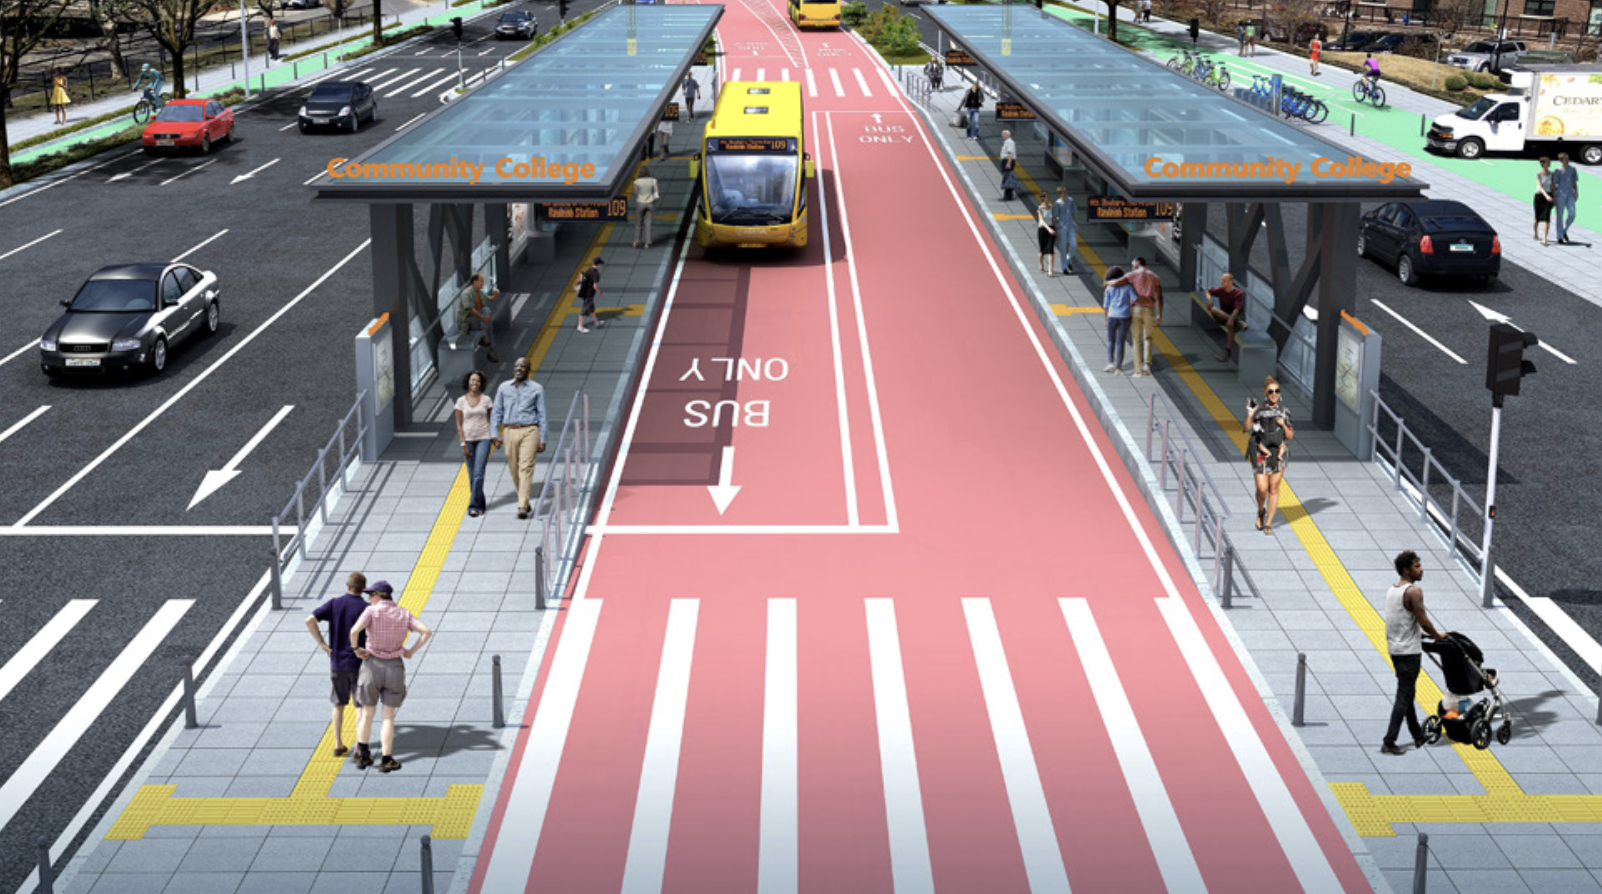 A rendering of a bus rapid transit station with red-painted bus lanes in the center and large boarding platforms on either side. Signs on top of the canopies above the platform say "community college". On either side of the platform are crosswalks and multiple lanes for car traffic.